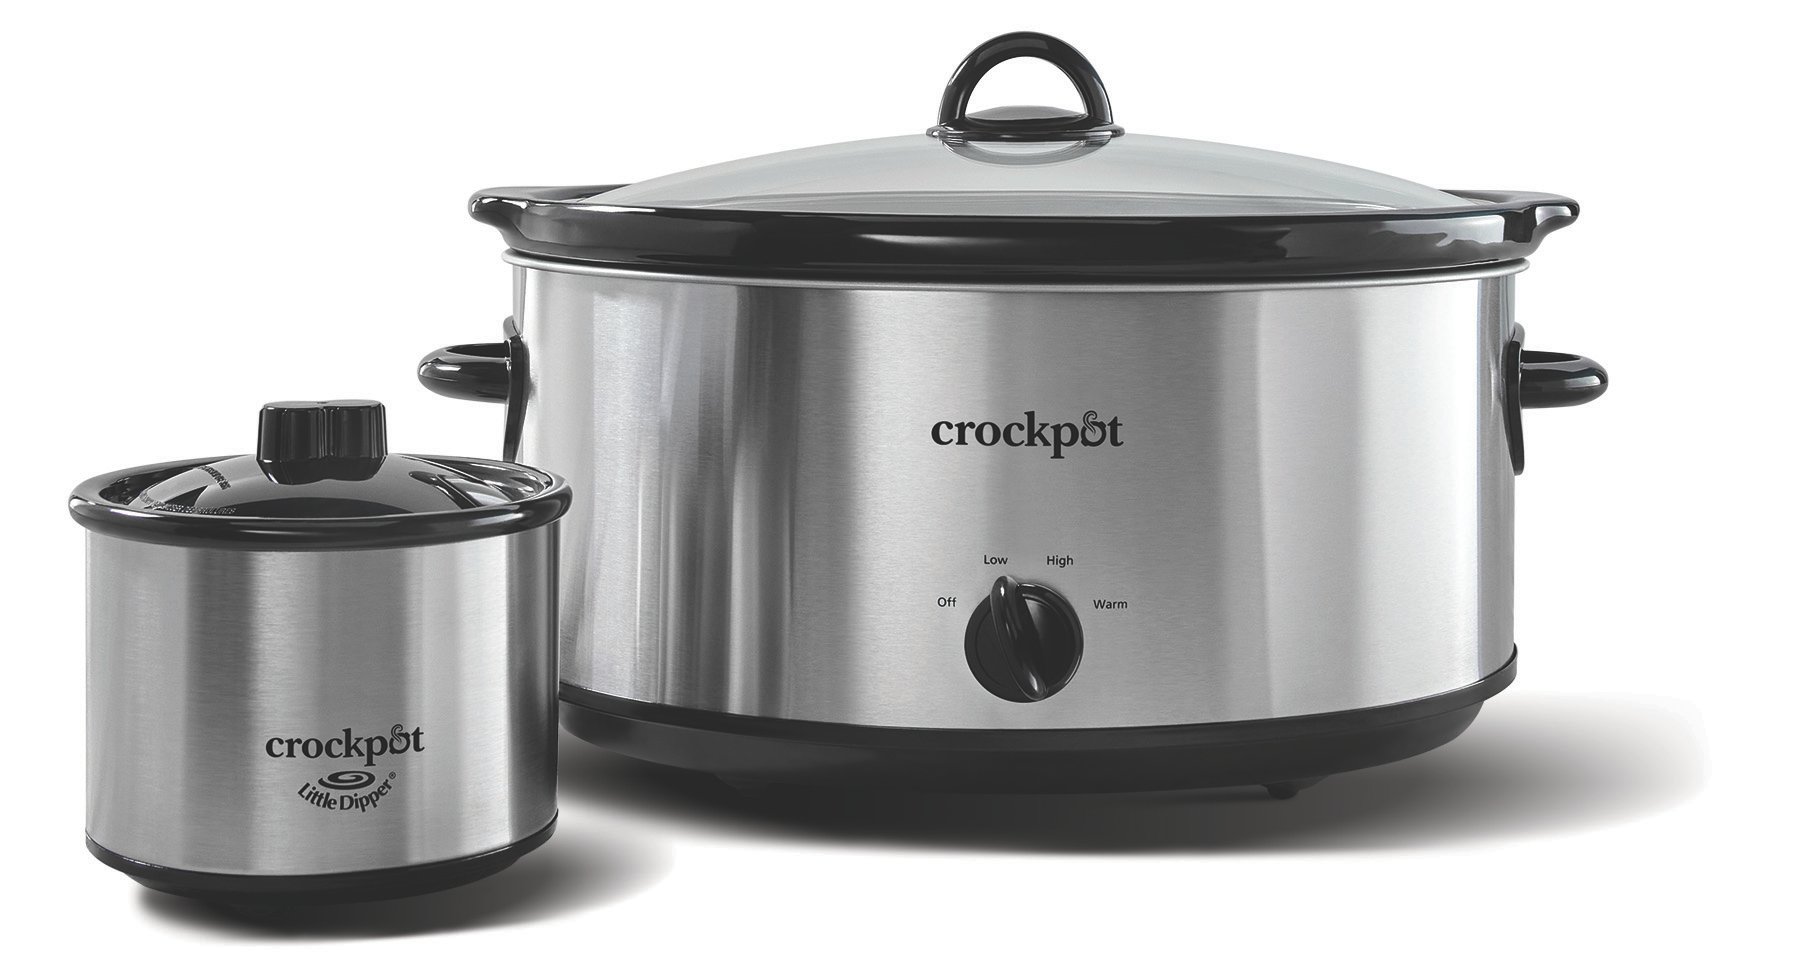 Crockpot™ 8-Quart Slow Manual, Stainless Steel with Little Dipper® Food Warmer